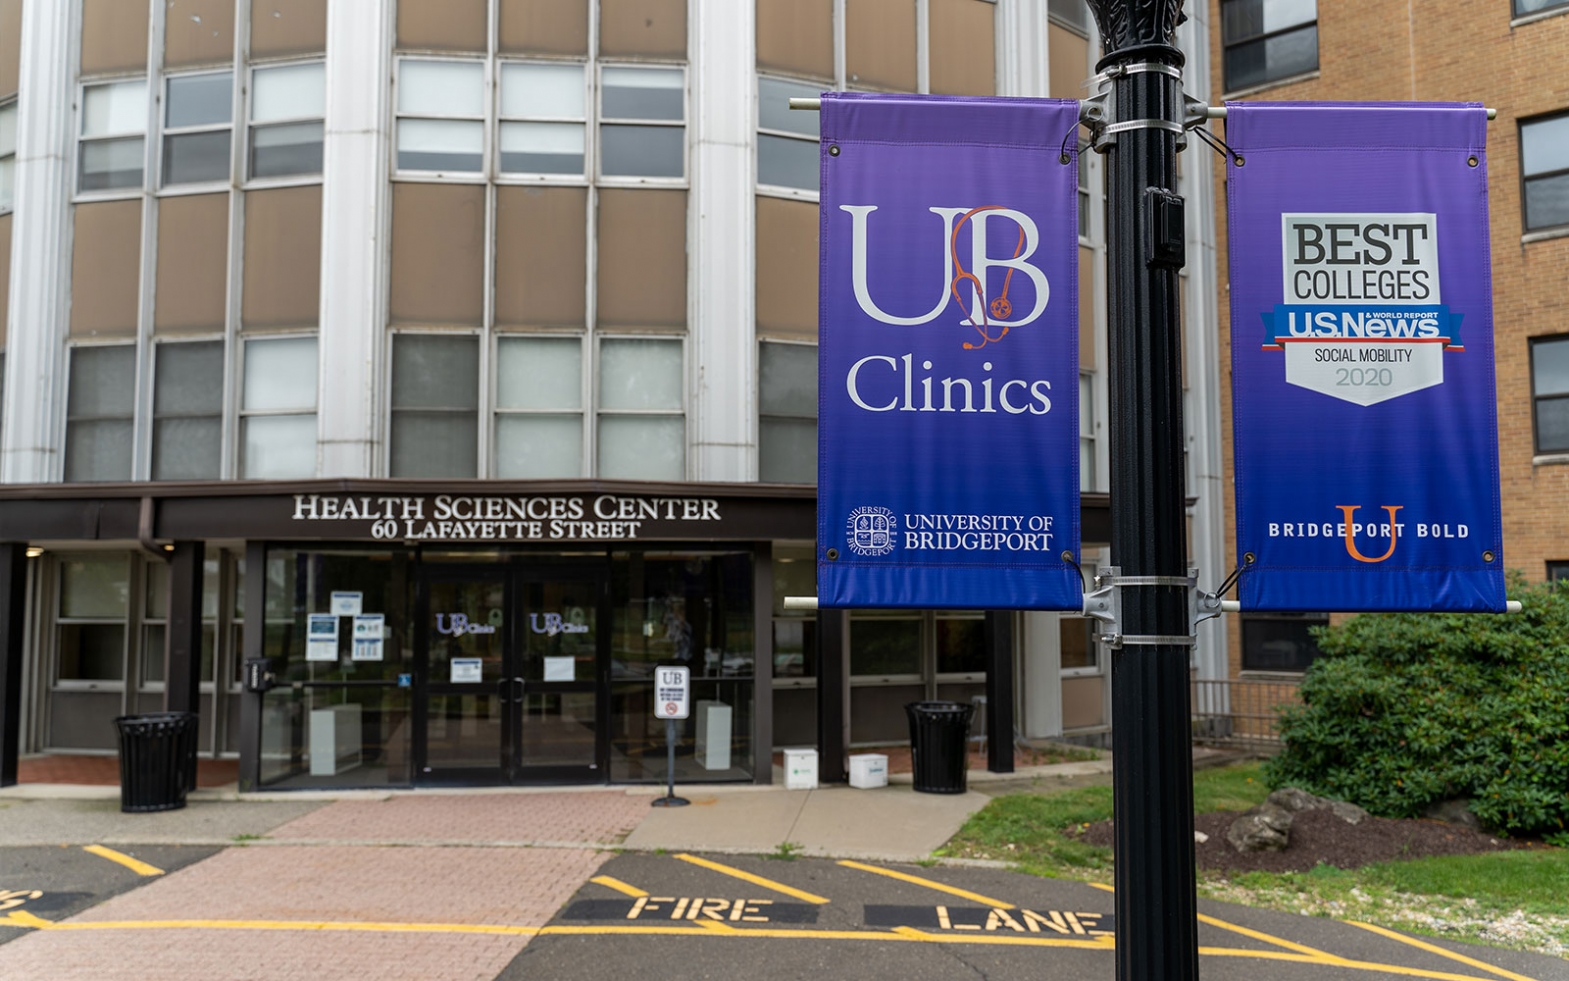 exterior of health sciences building showing UB clinics sign